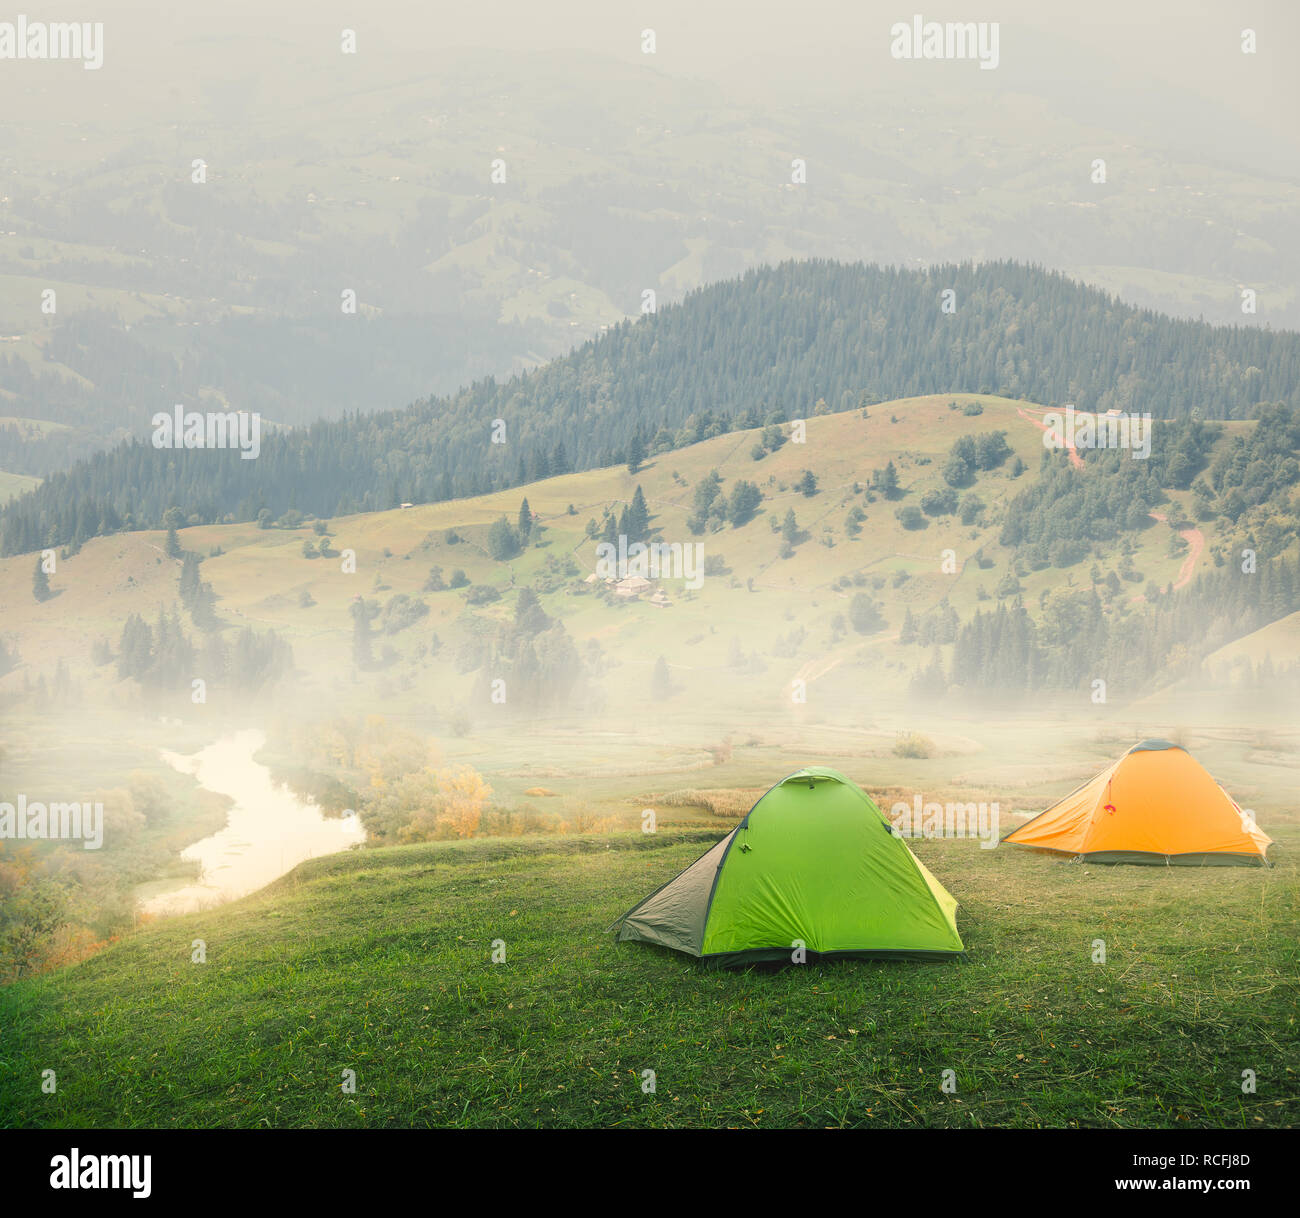 Green and orange tents on plain in mountains on foggy morning Stock Photo